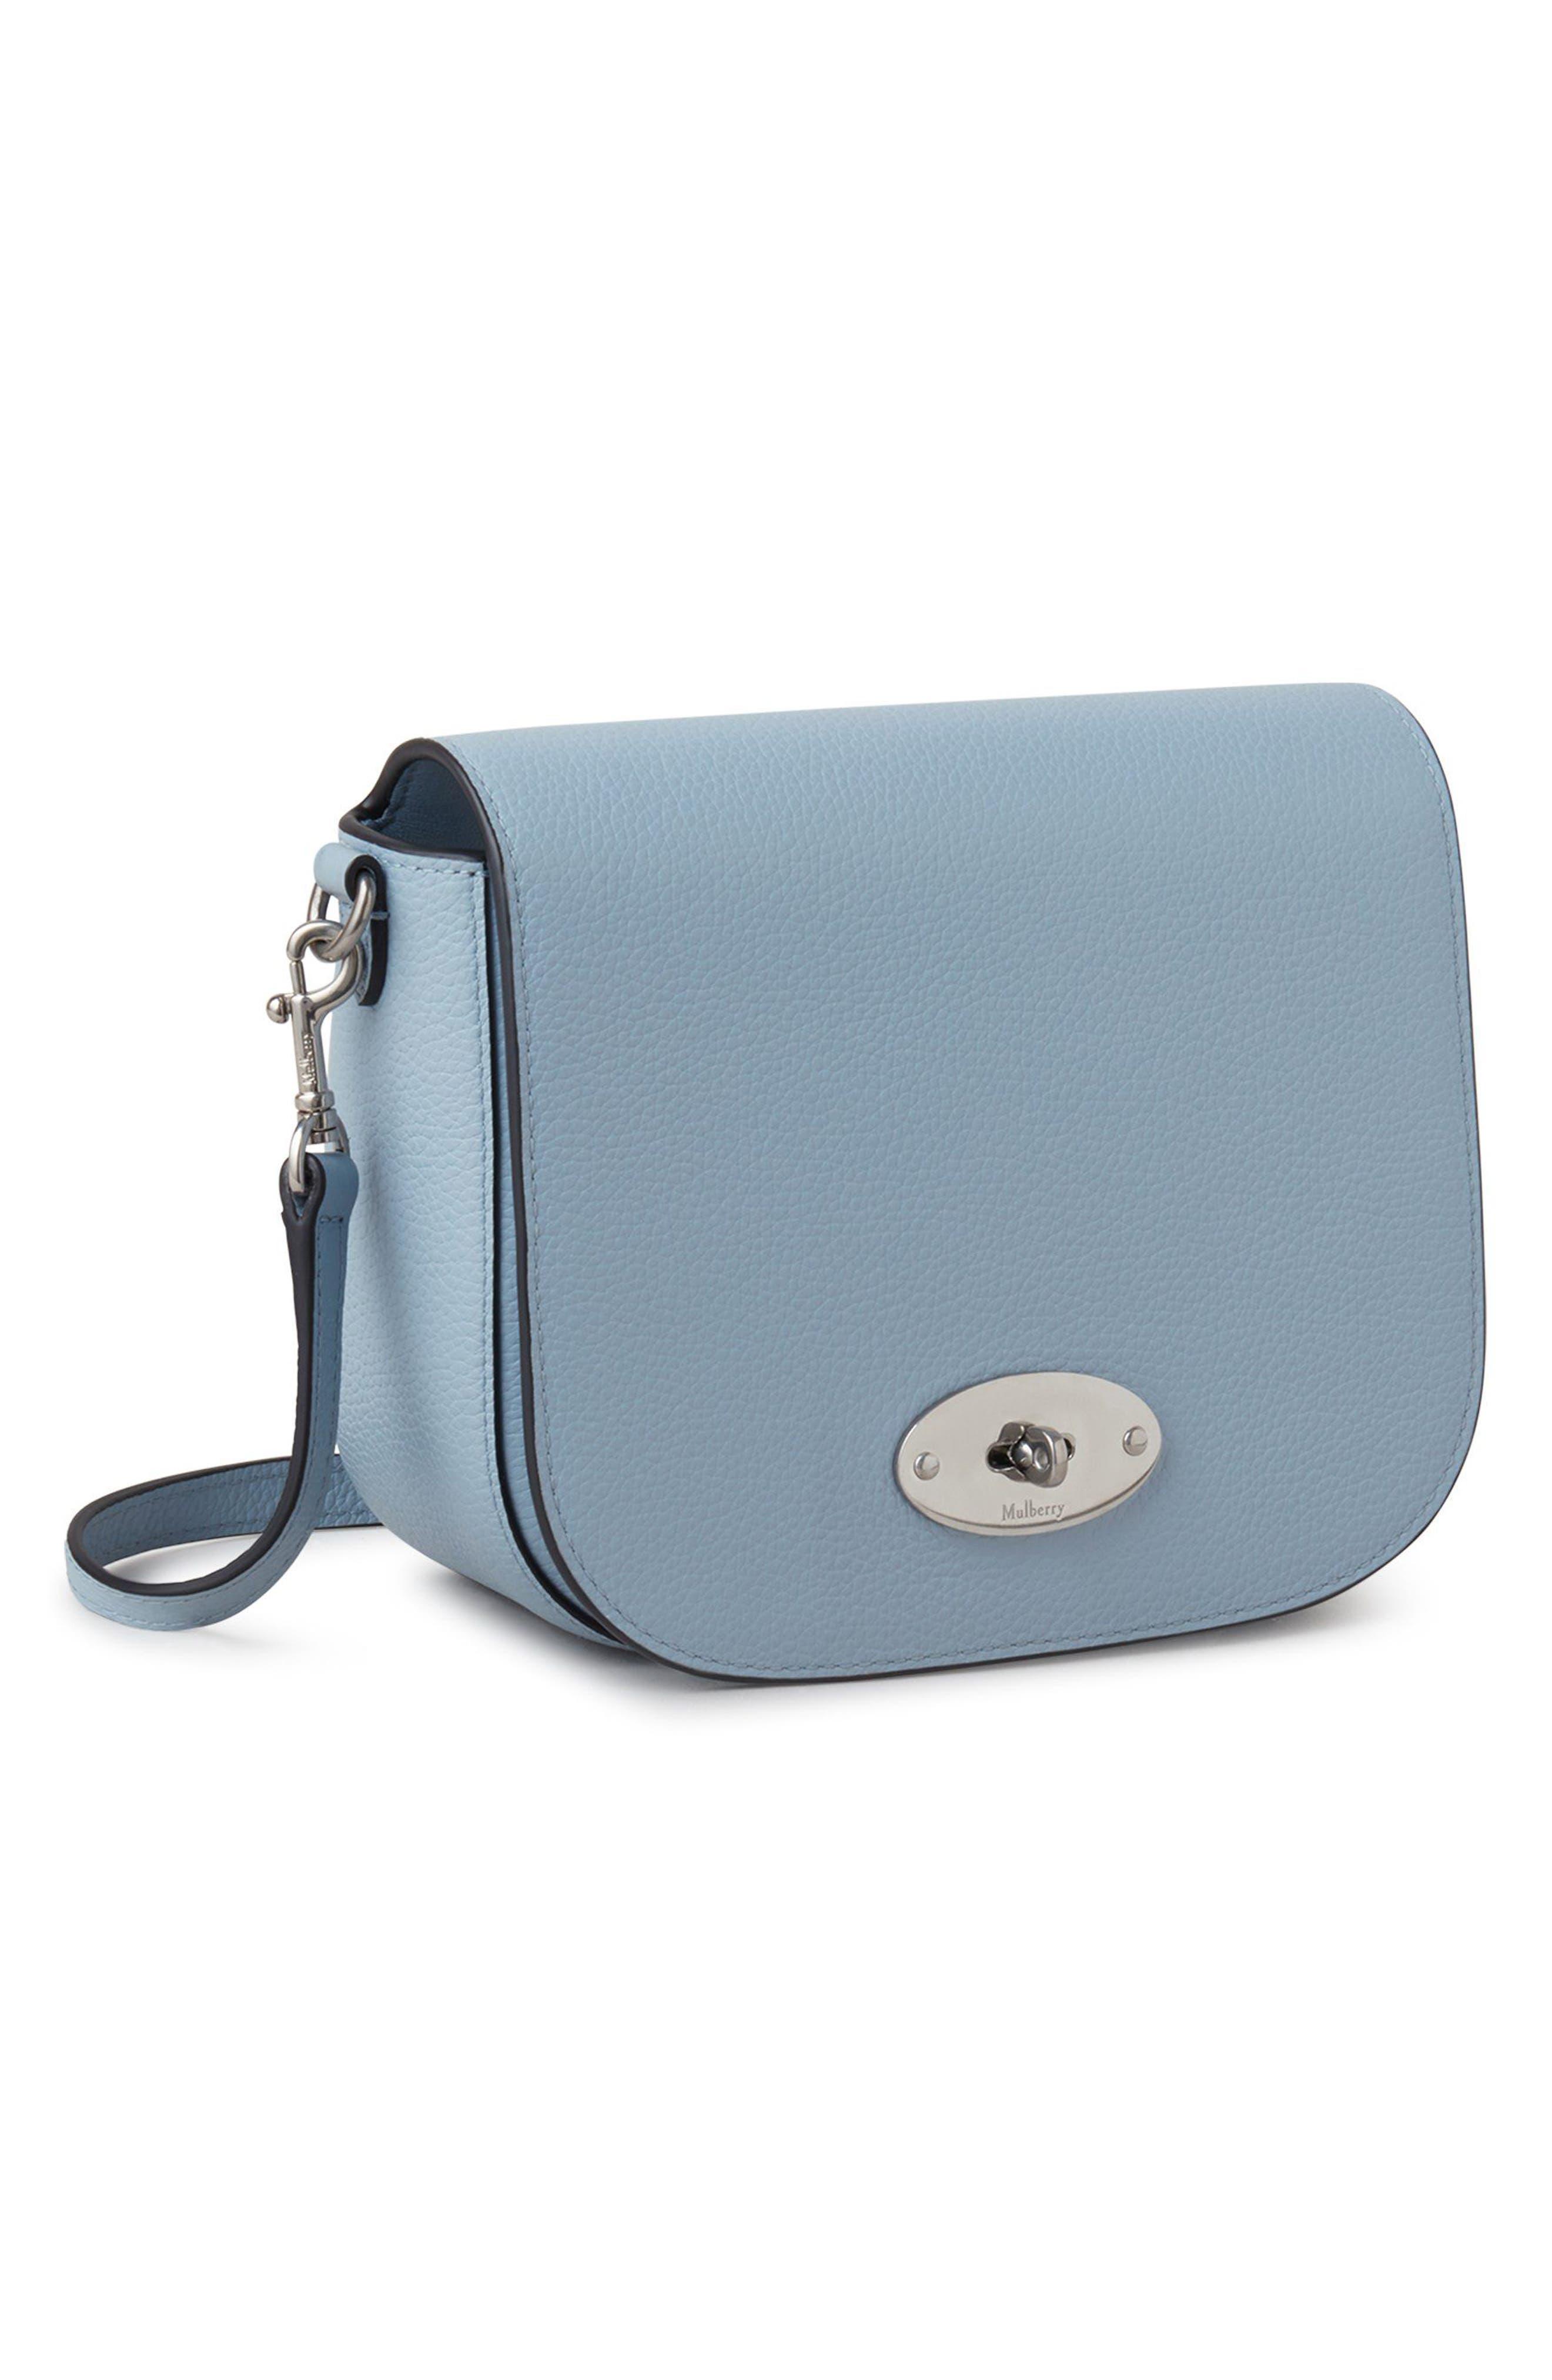 Mulberry Small Darley Leather Crossbody Bag in Blue | Lyst